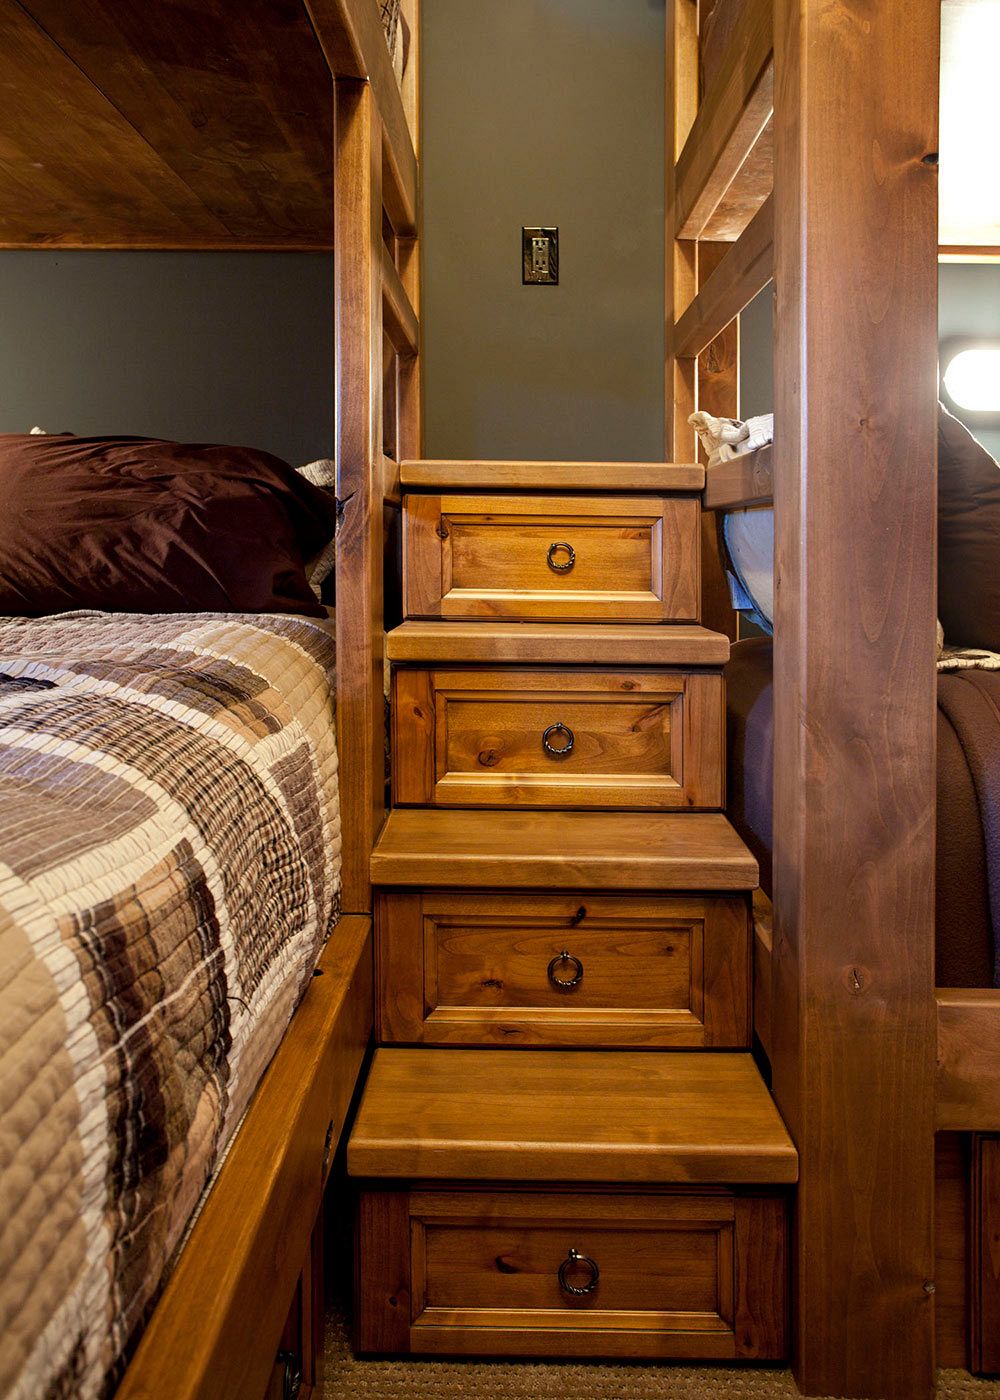 Bunk Bed steps with drawers.